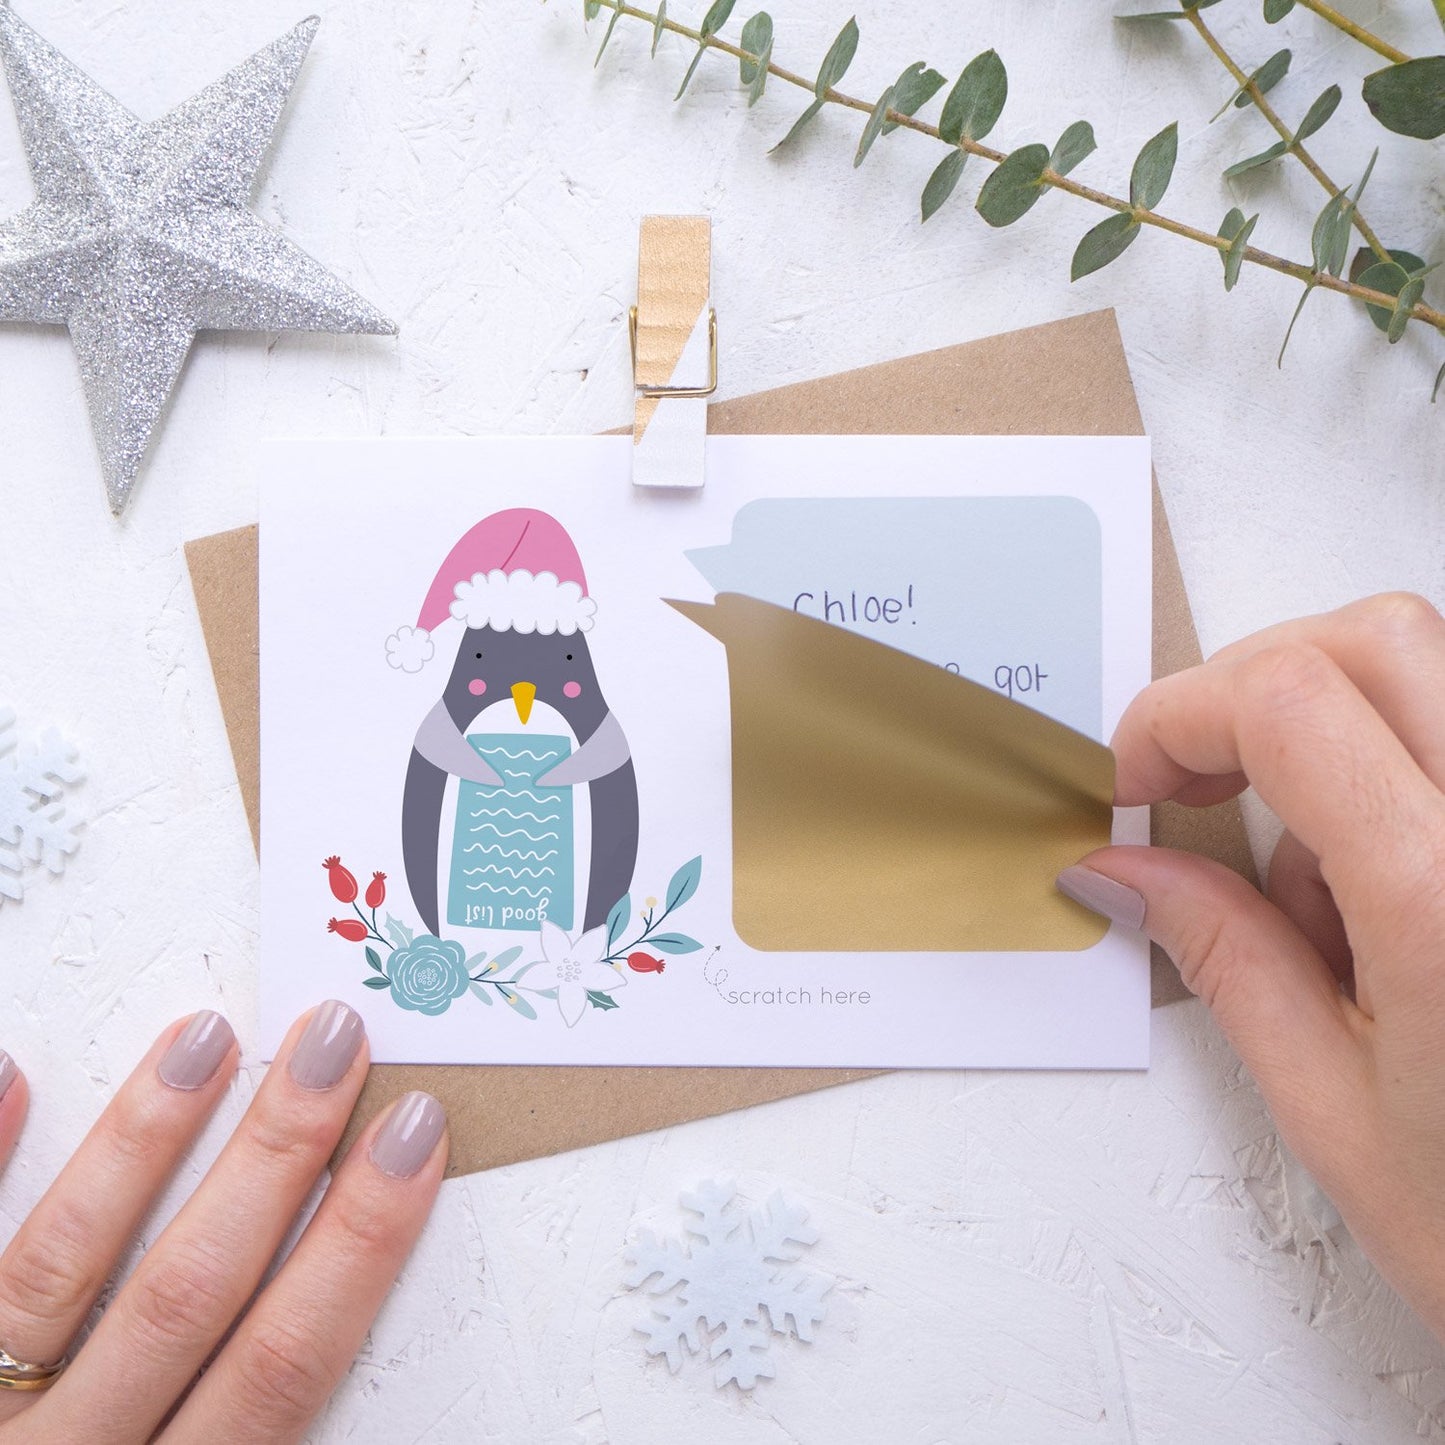 Personalised Penguin secret message Christmas scratch card with the scratch and reveal panel being applied.